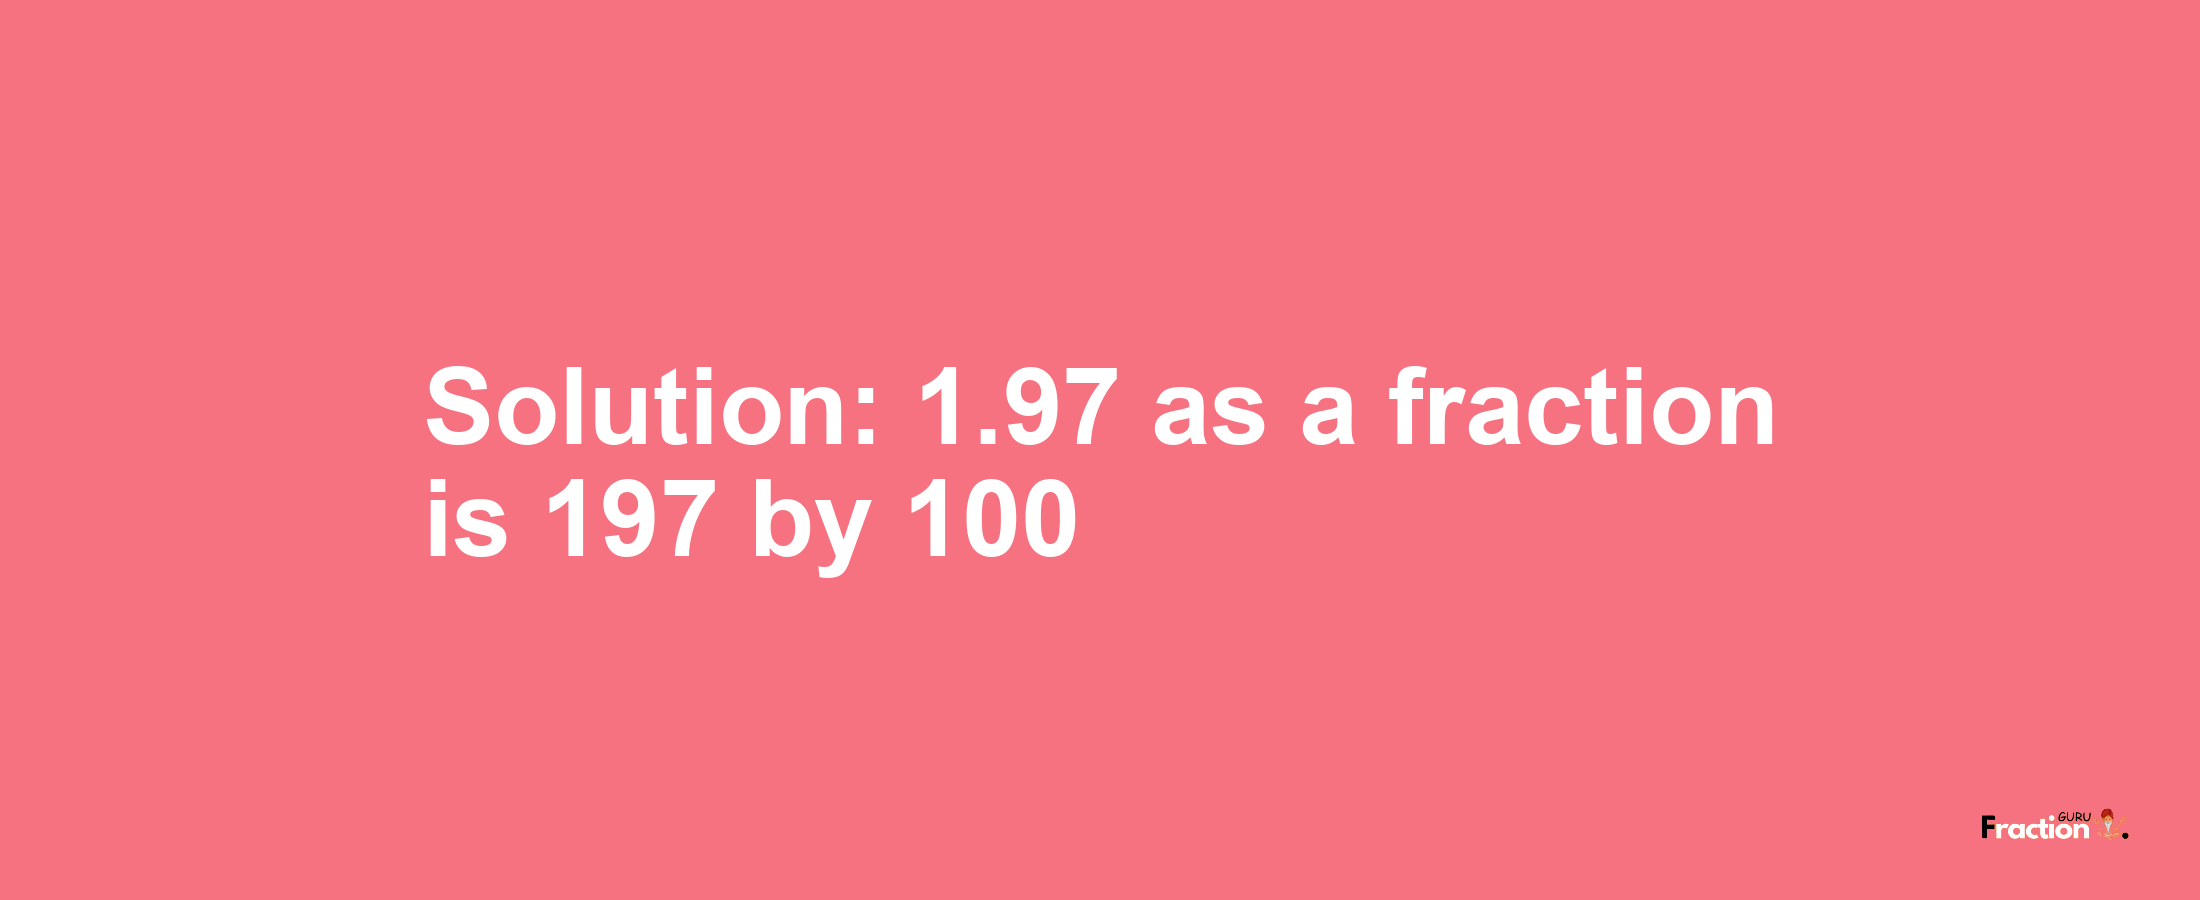 Solution:1.97 as a fraction is 197/100